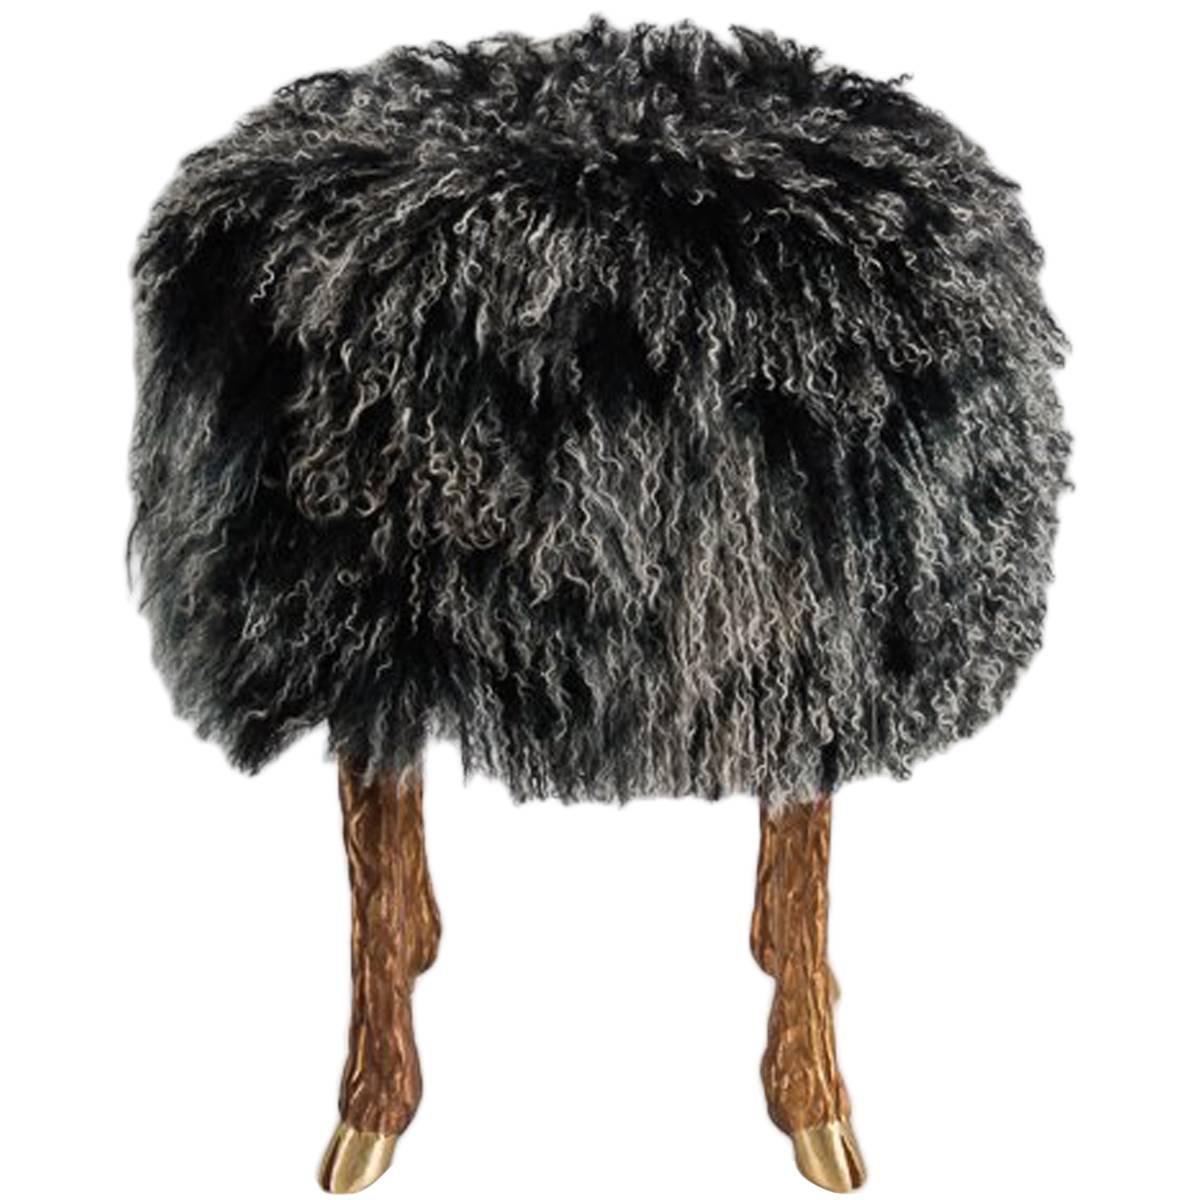 This surrealistic stool, which rests on silver or bronze legs modeled after a goat's, and is upholstered in lamb's wool, is a successful new take on a centuries-old tradition: transforming the pastoral into exceptional, lush decor.